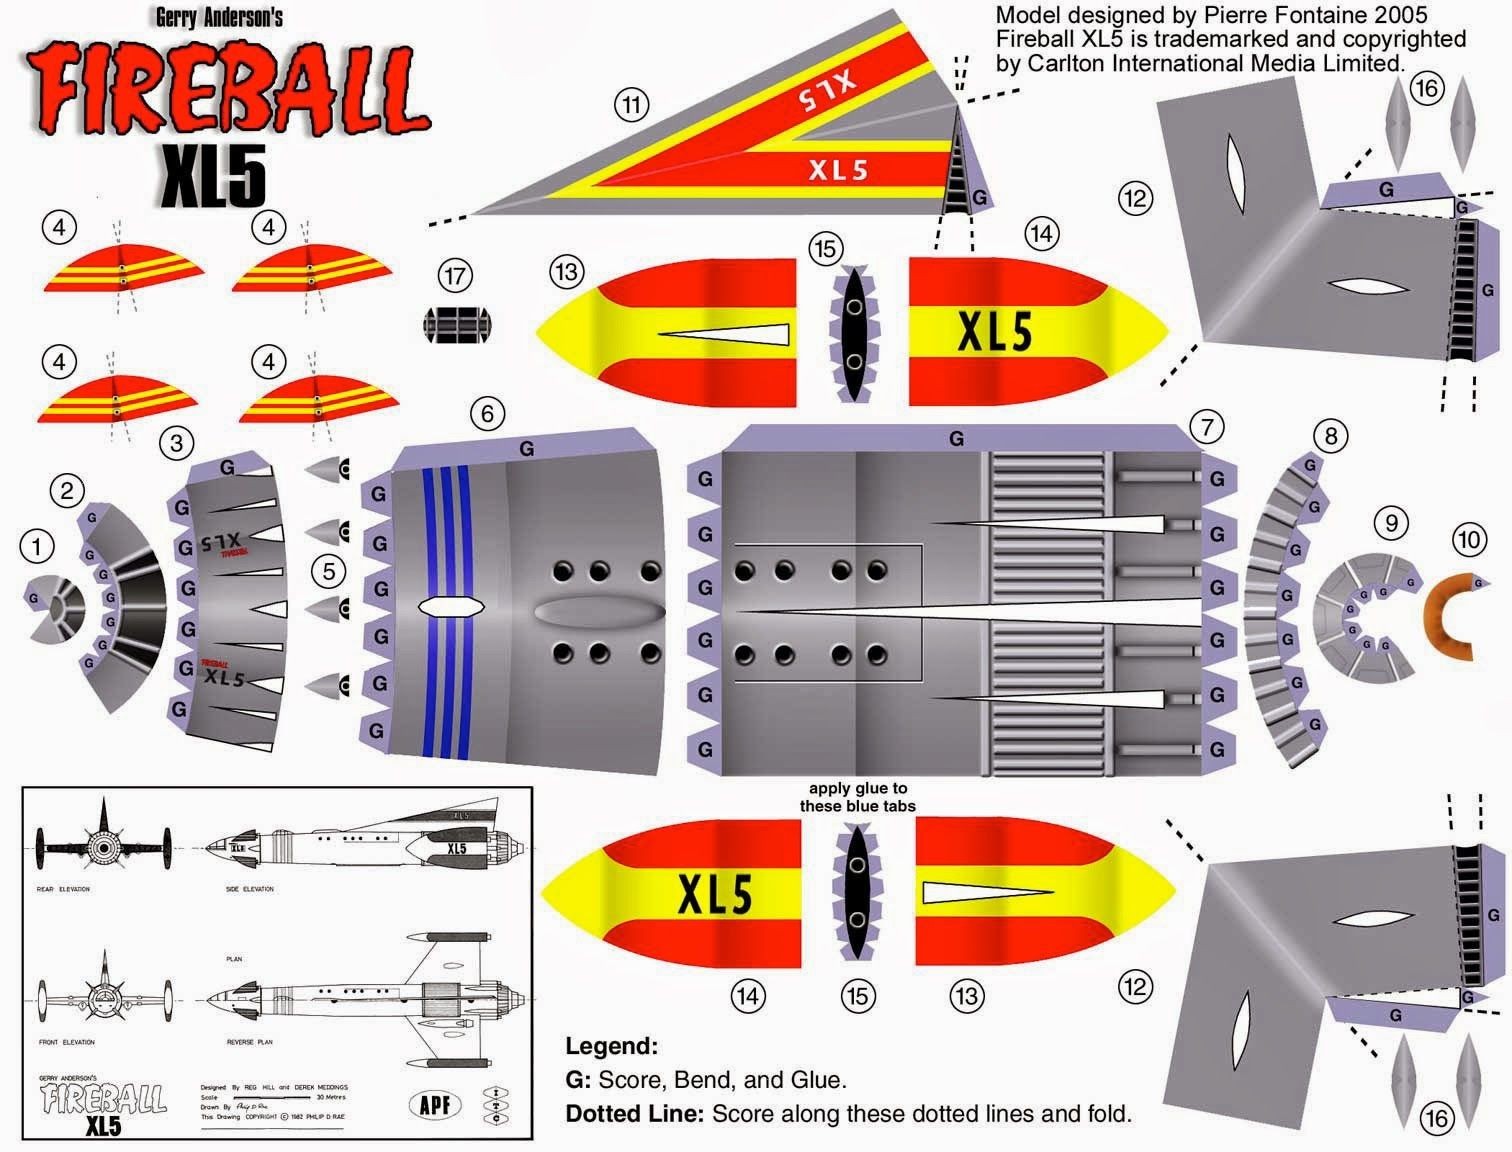 Space Shuttle Papercraft Paper Model Pattern Depicting the Spacecraft "fireball Xl5" From